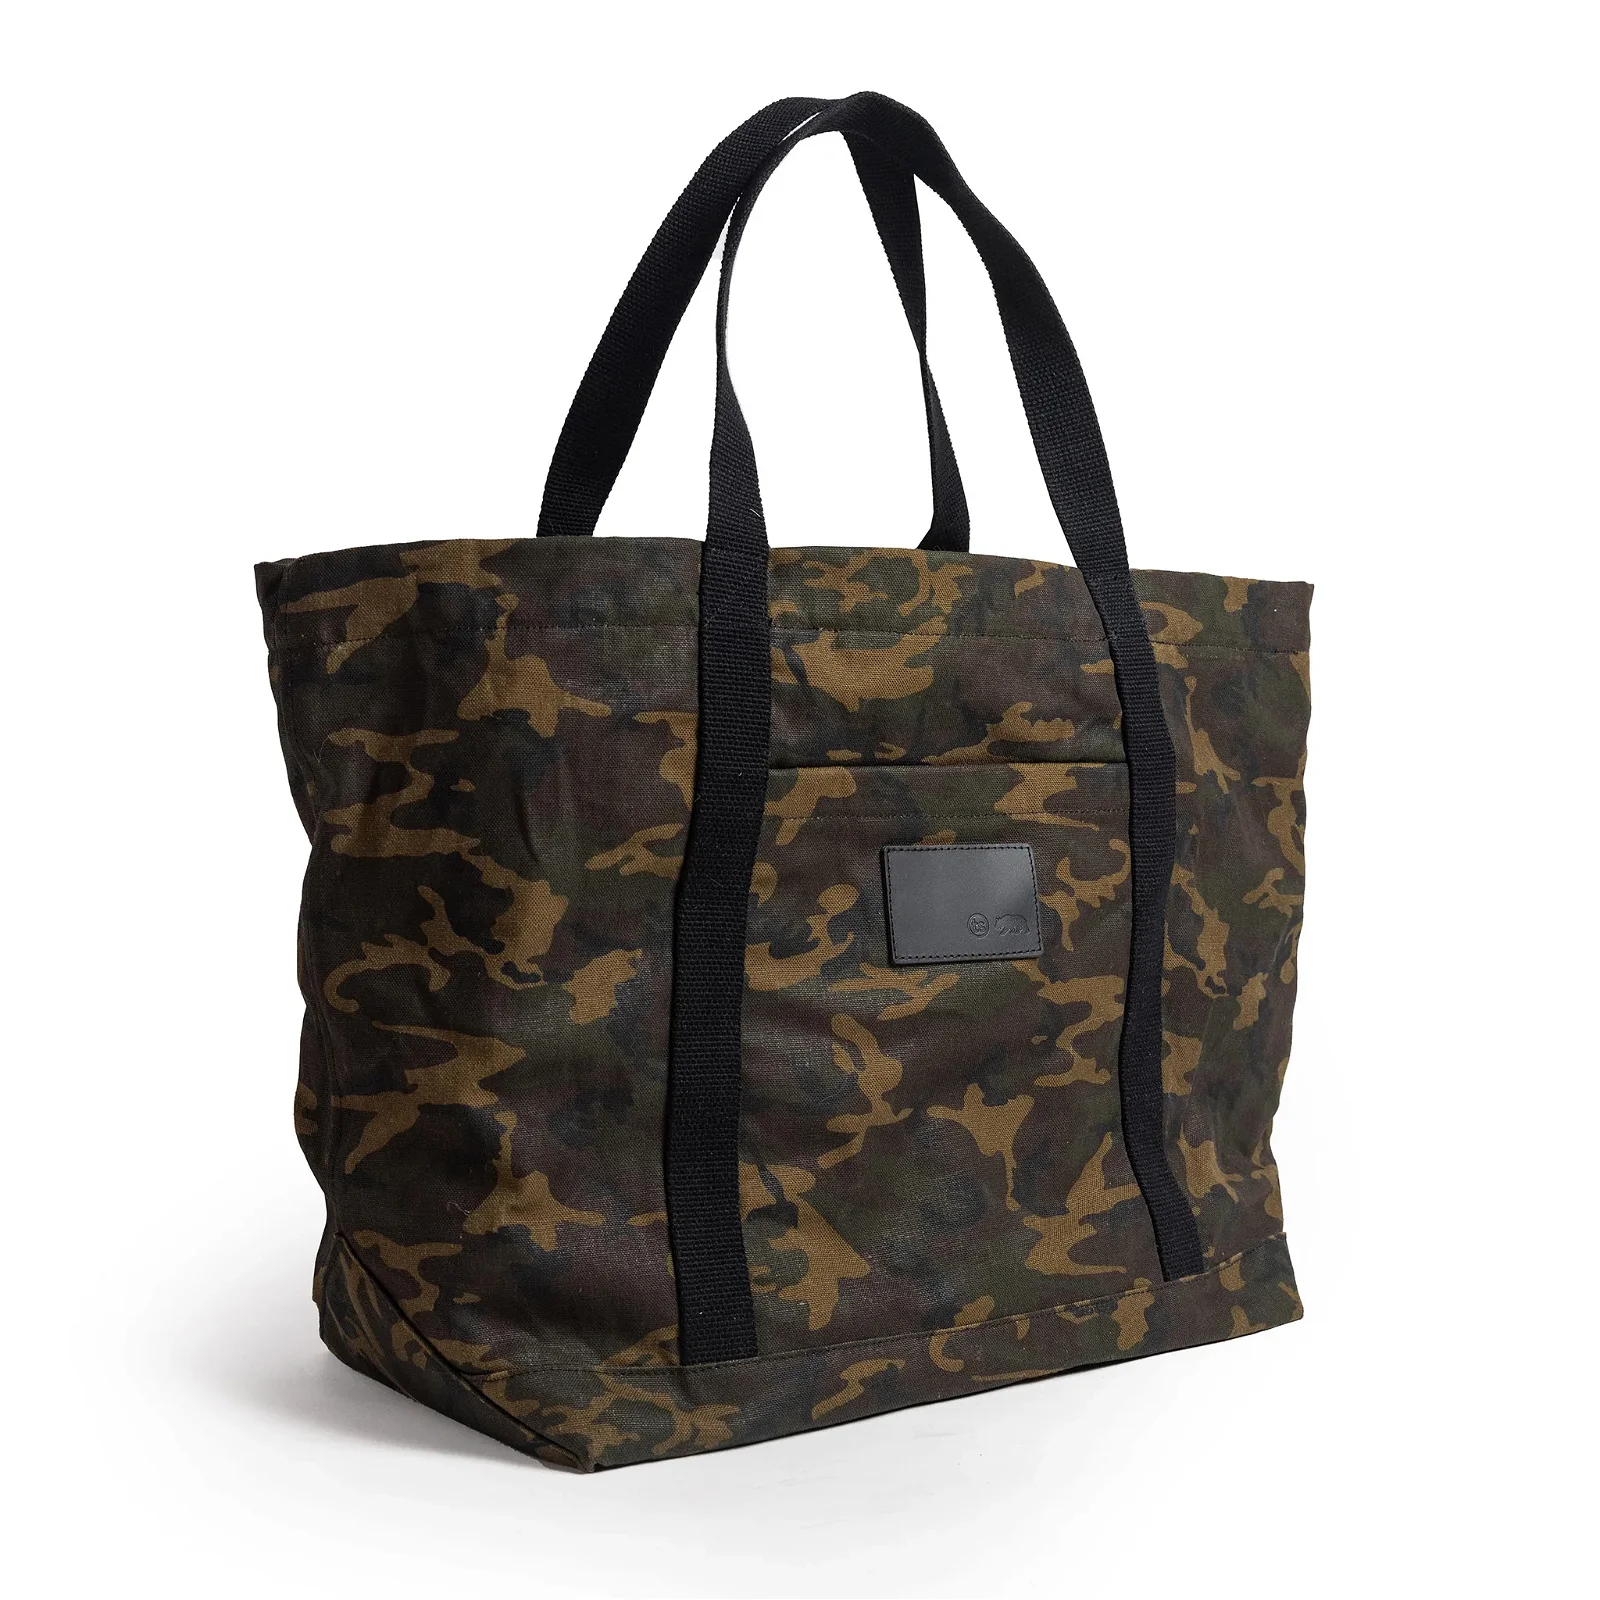 Image of The Market Tote in Camo Boss Duck